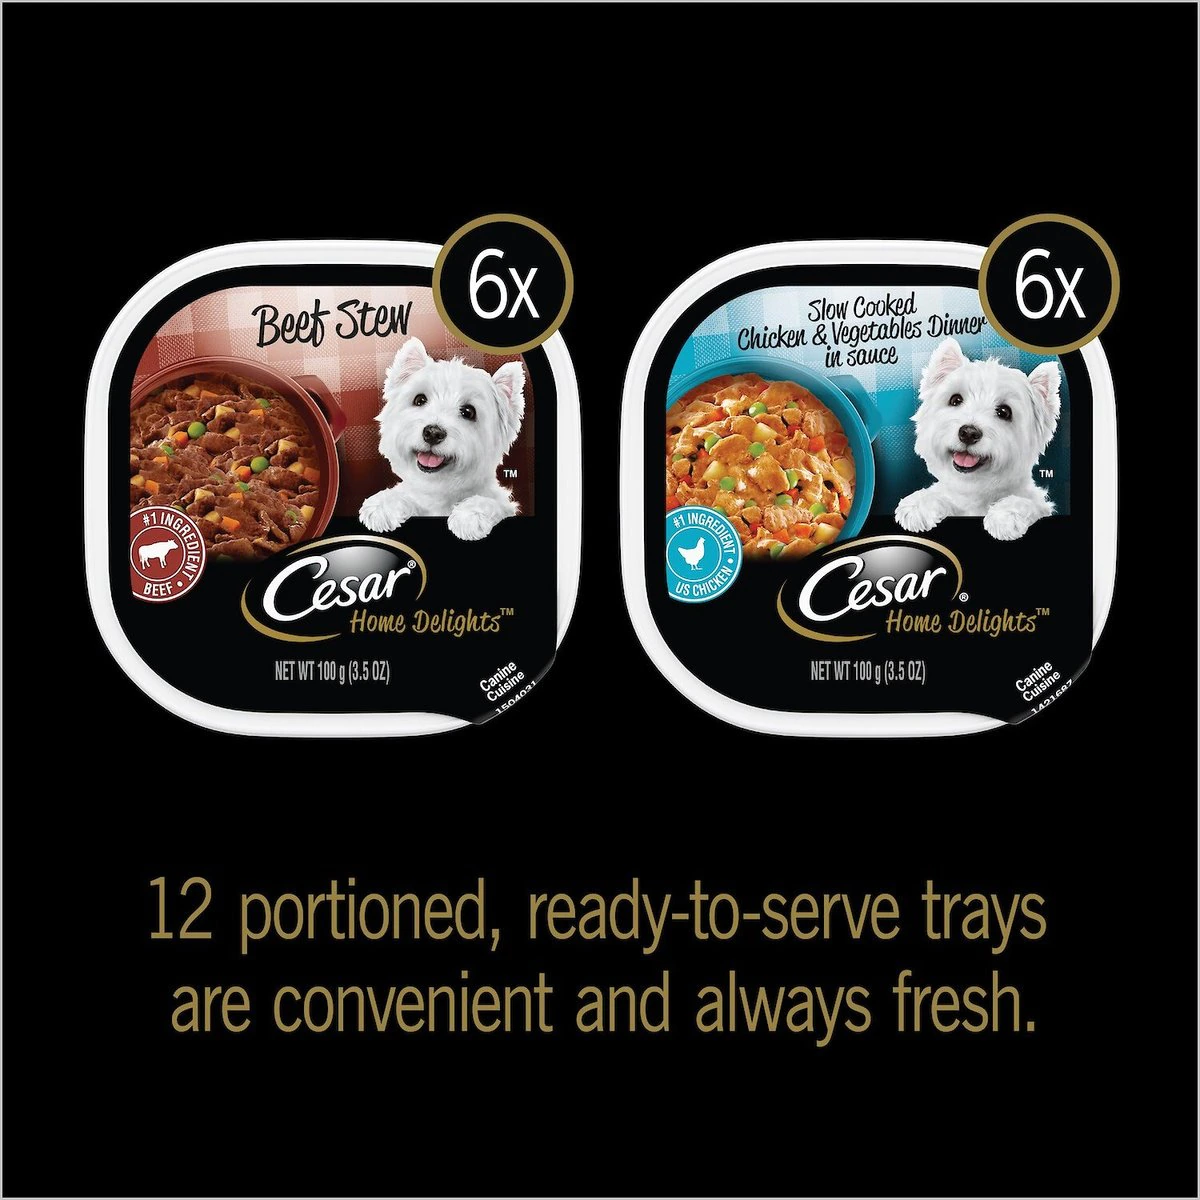 CESAR HOME DELIGHTS Soft Wet Dog Food Slow Cooked Chicken & Vegetables Dinner and Beef Stew Variety Pack, Easy Peel Trays, 3.5 Oz - 12 Count (Pack of 2)